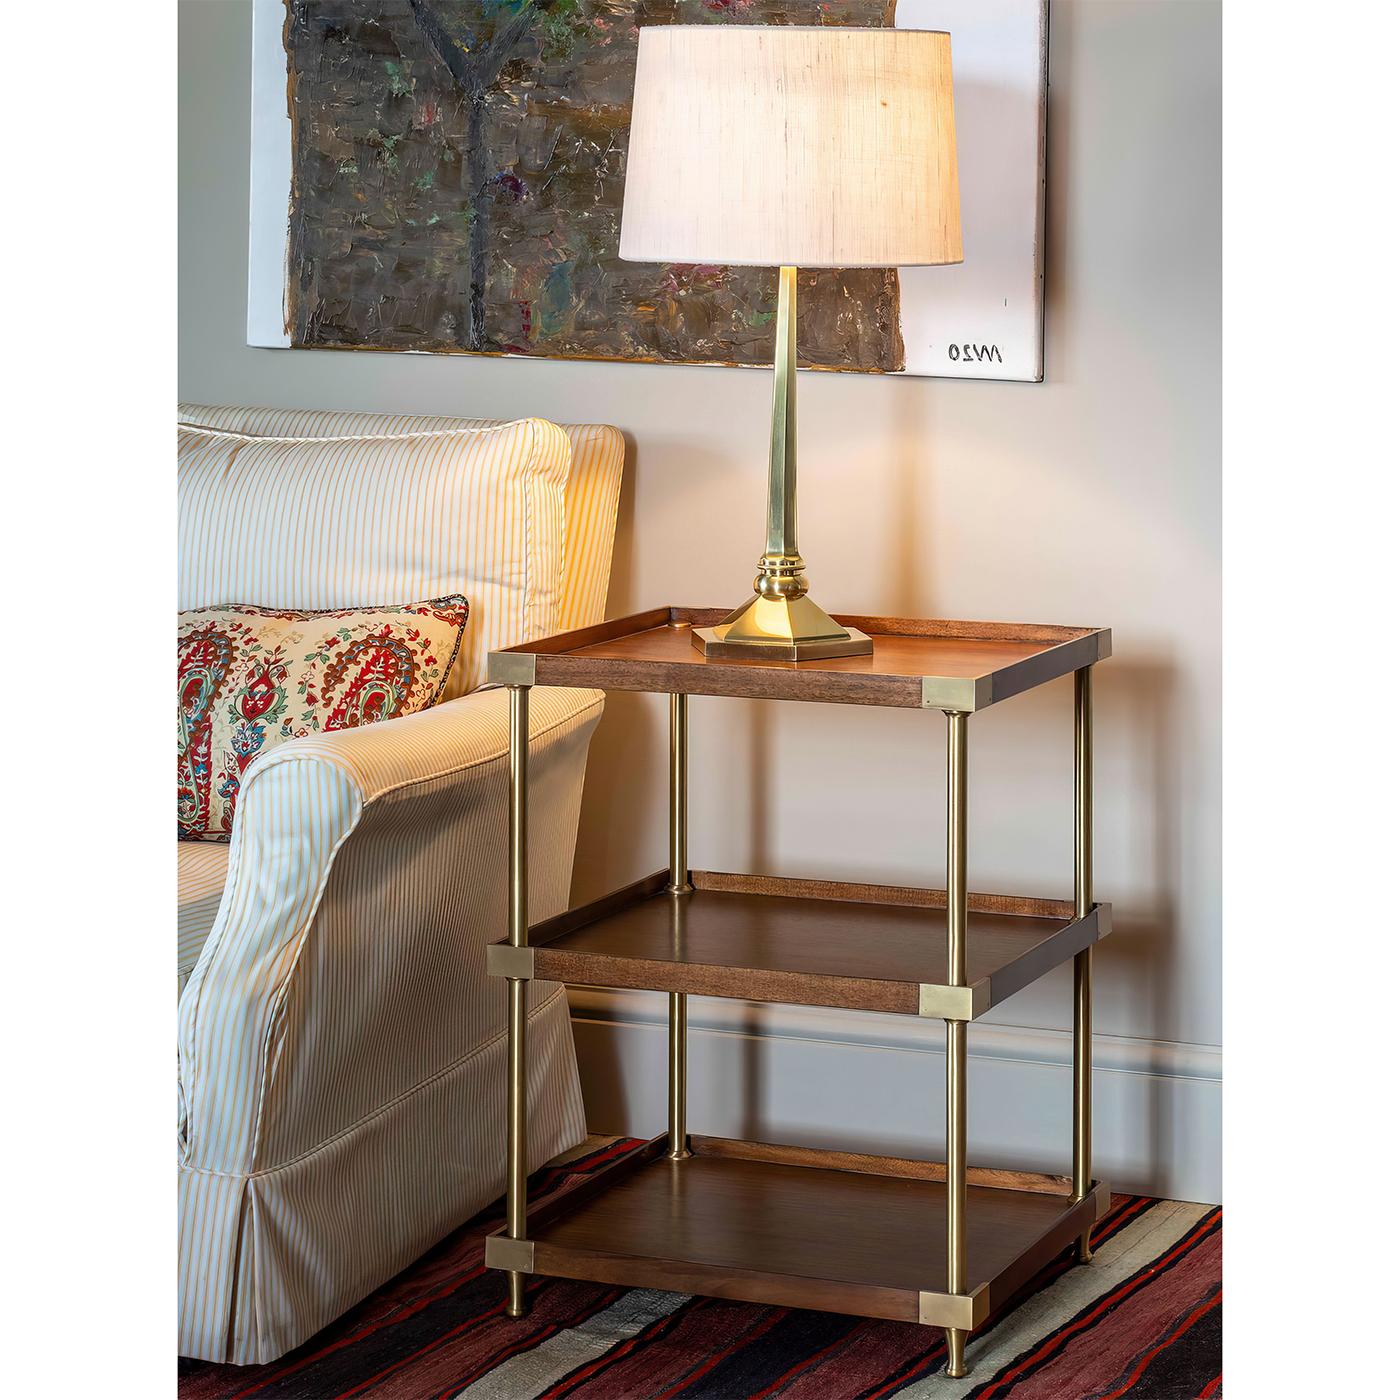 Modern Campaign Style Etagere. A combination of a traditional English campaign style with an updated modern design.

This three-tier etagere is a satisfying combination of wood and brass, it has a sophisticated, modern feel to it.

Dimensions: